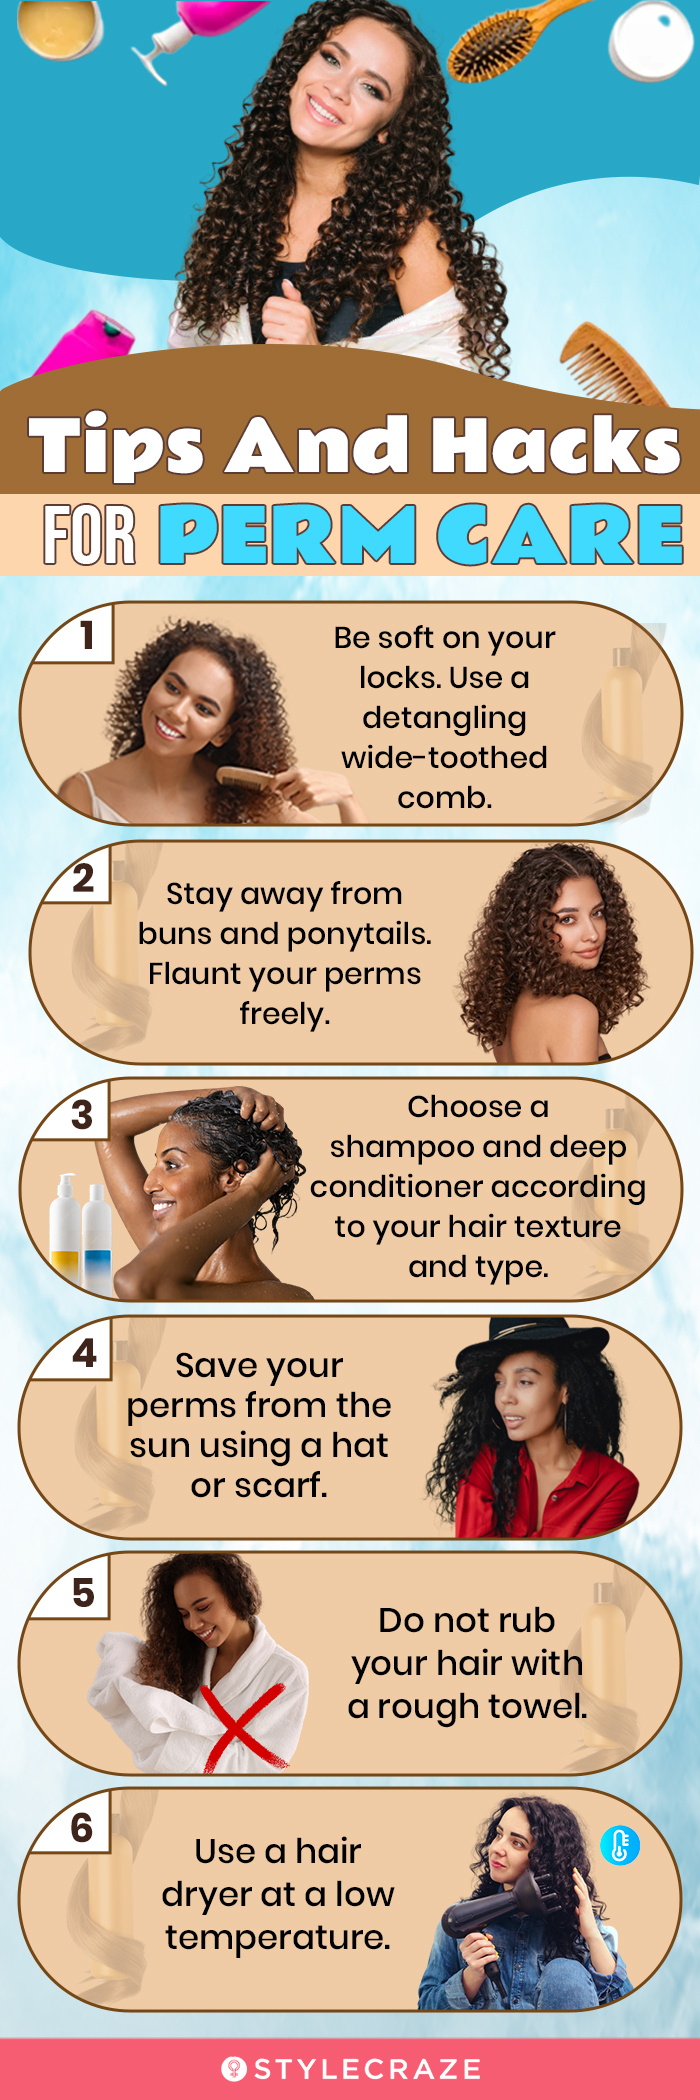 tips and hacks for perm care [infographic]